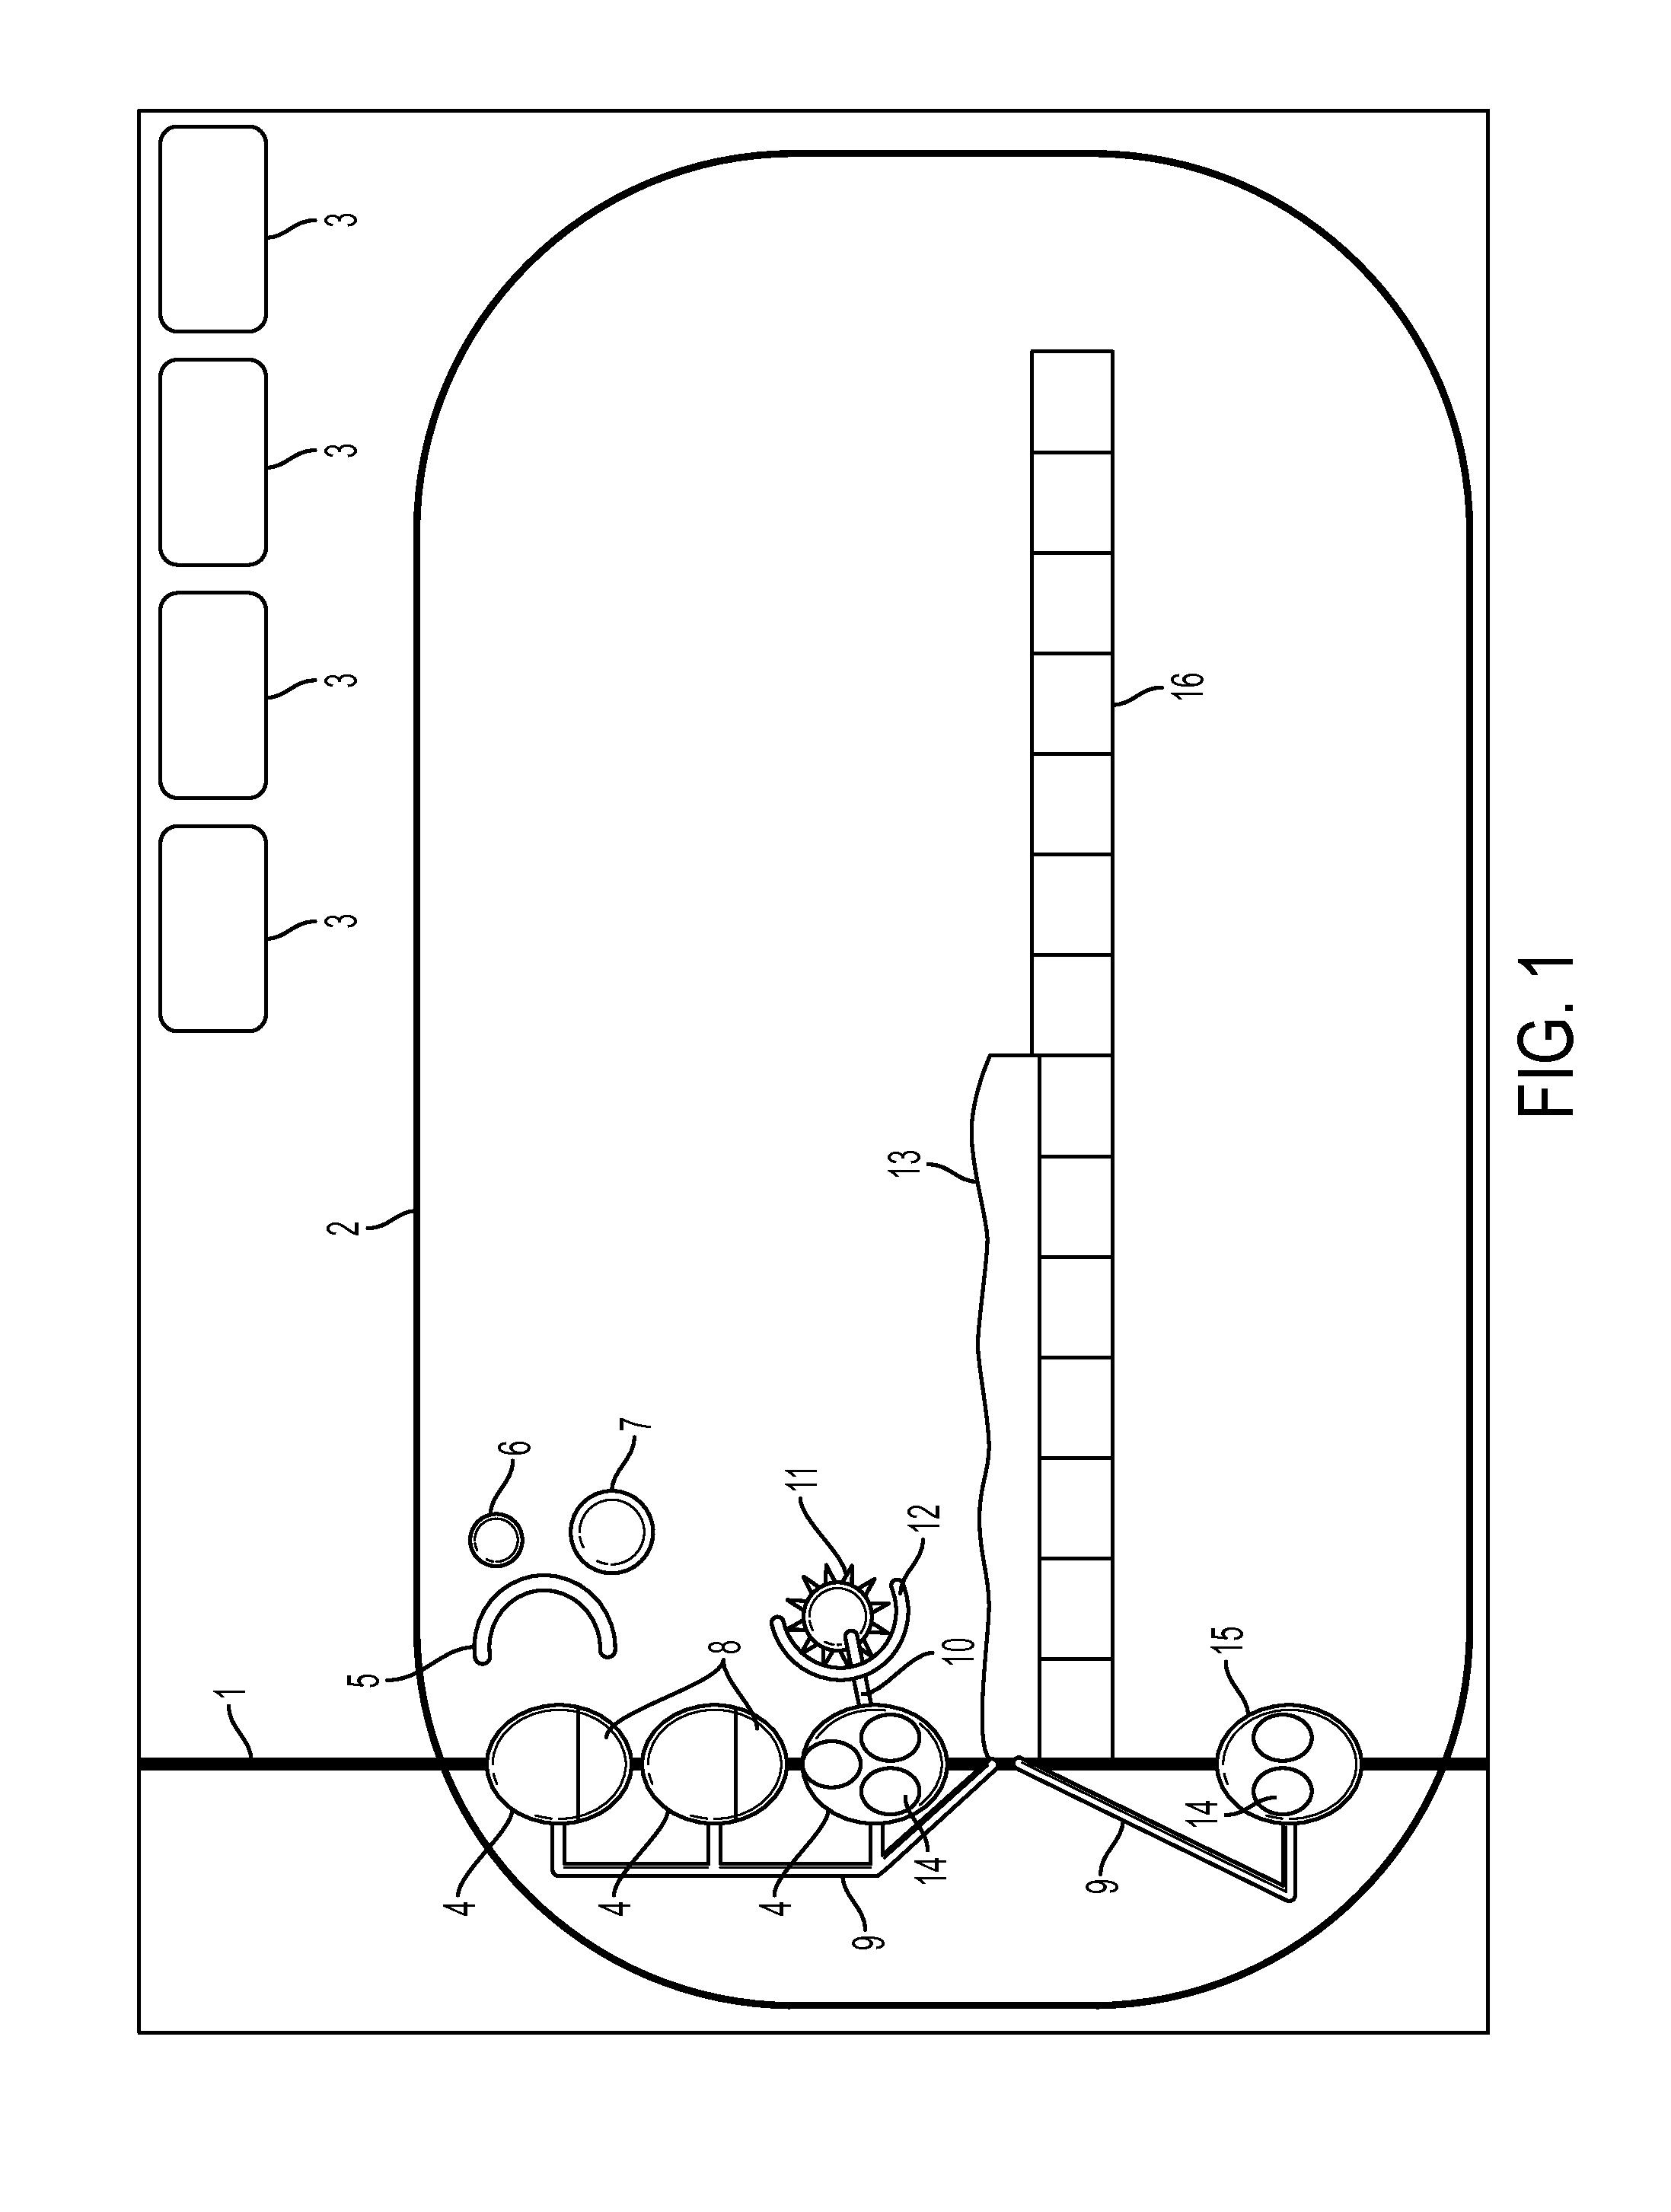 Systems and methods for resource planning using animation